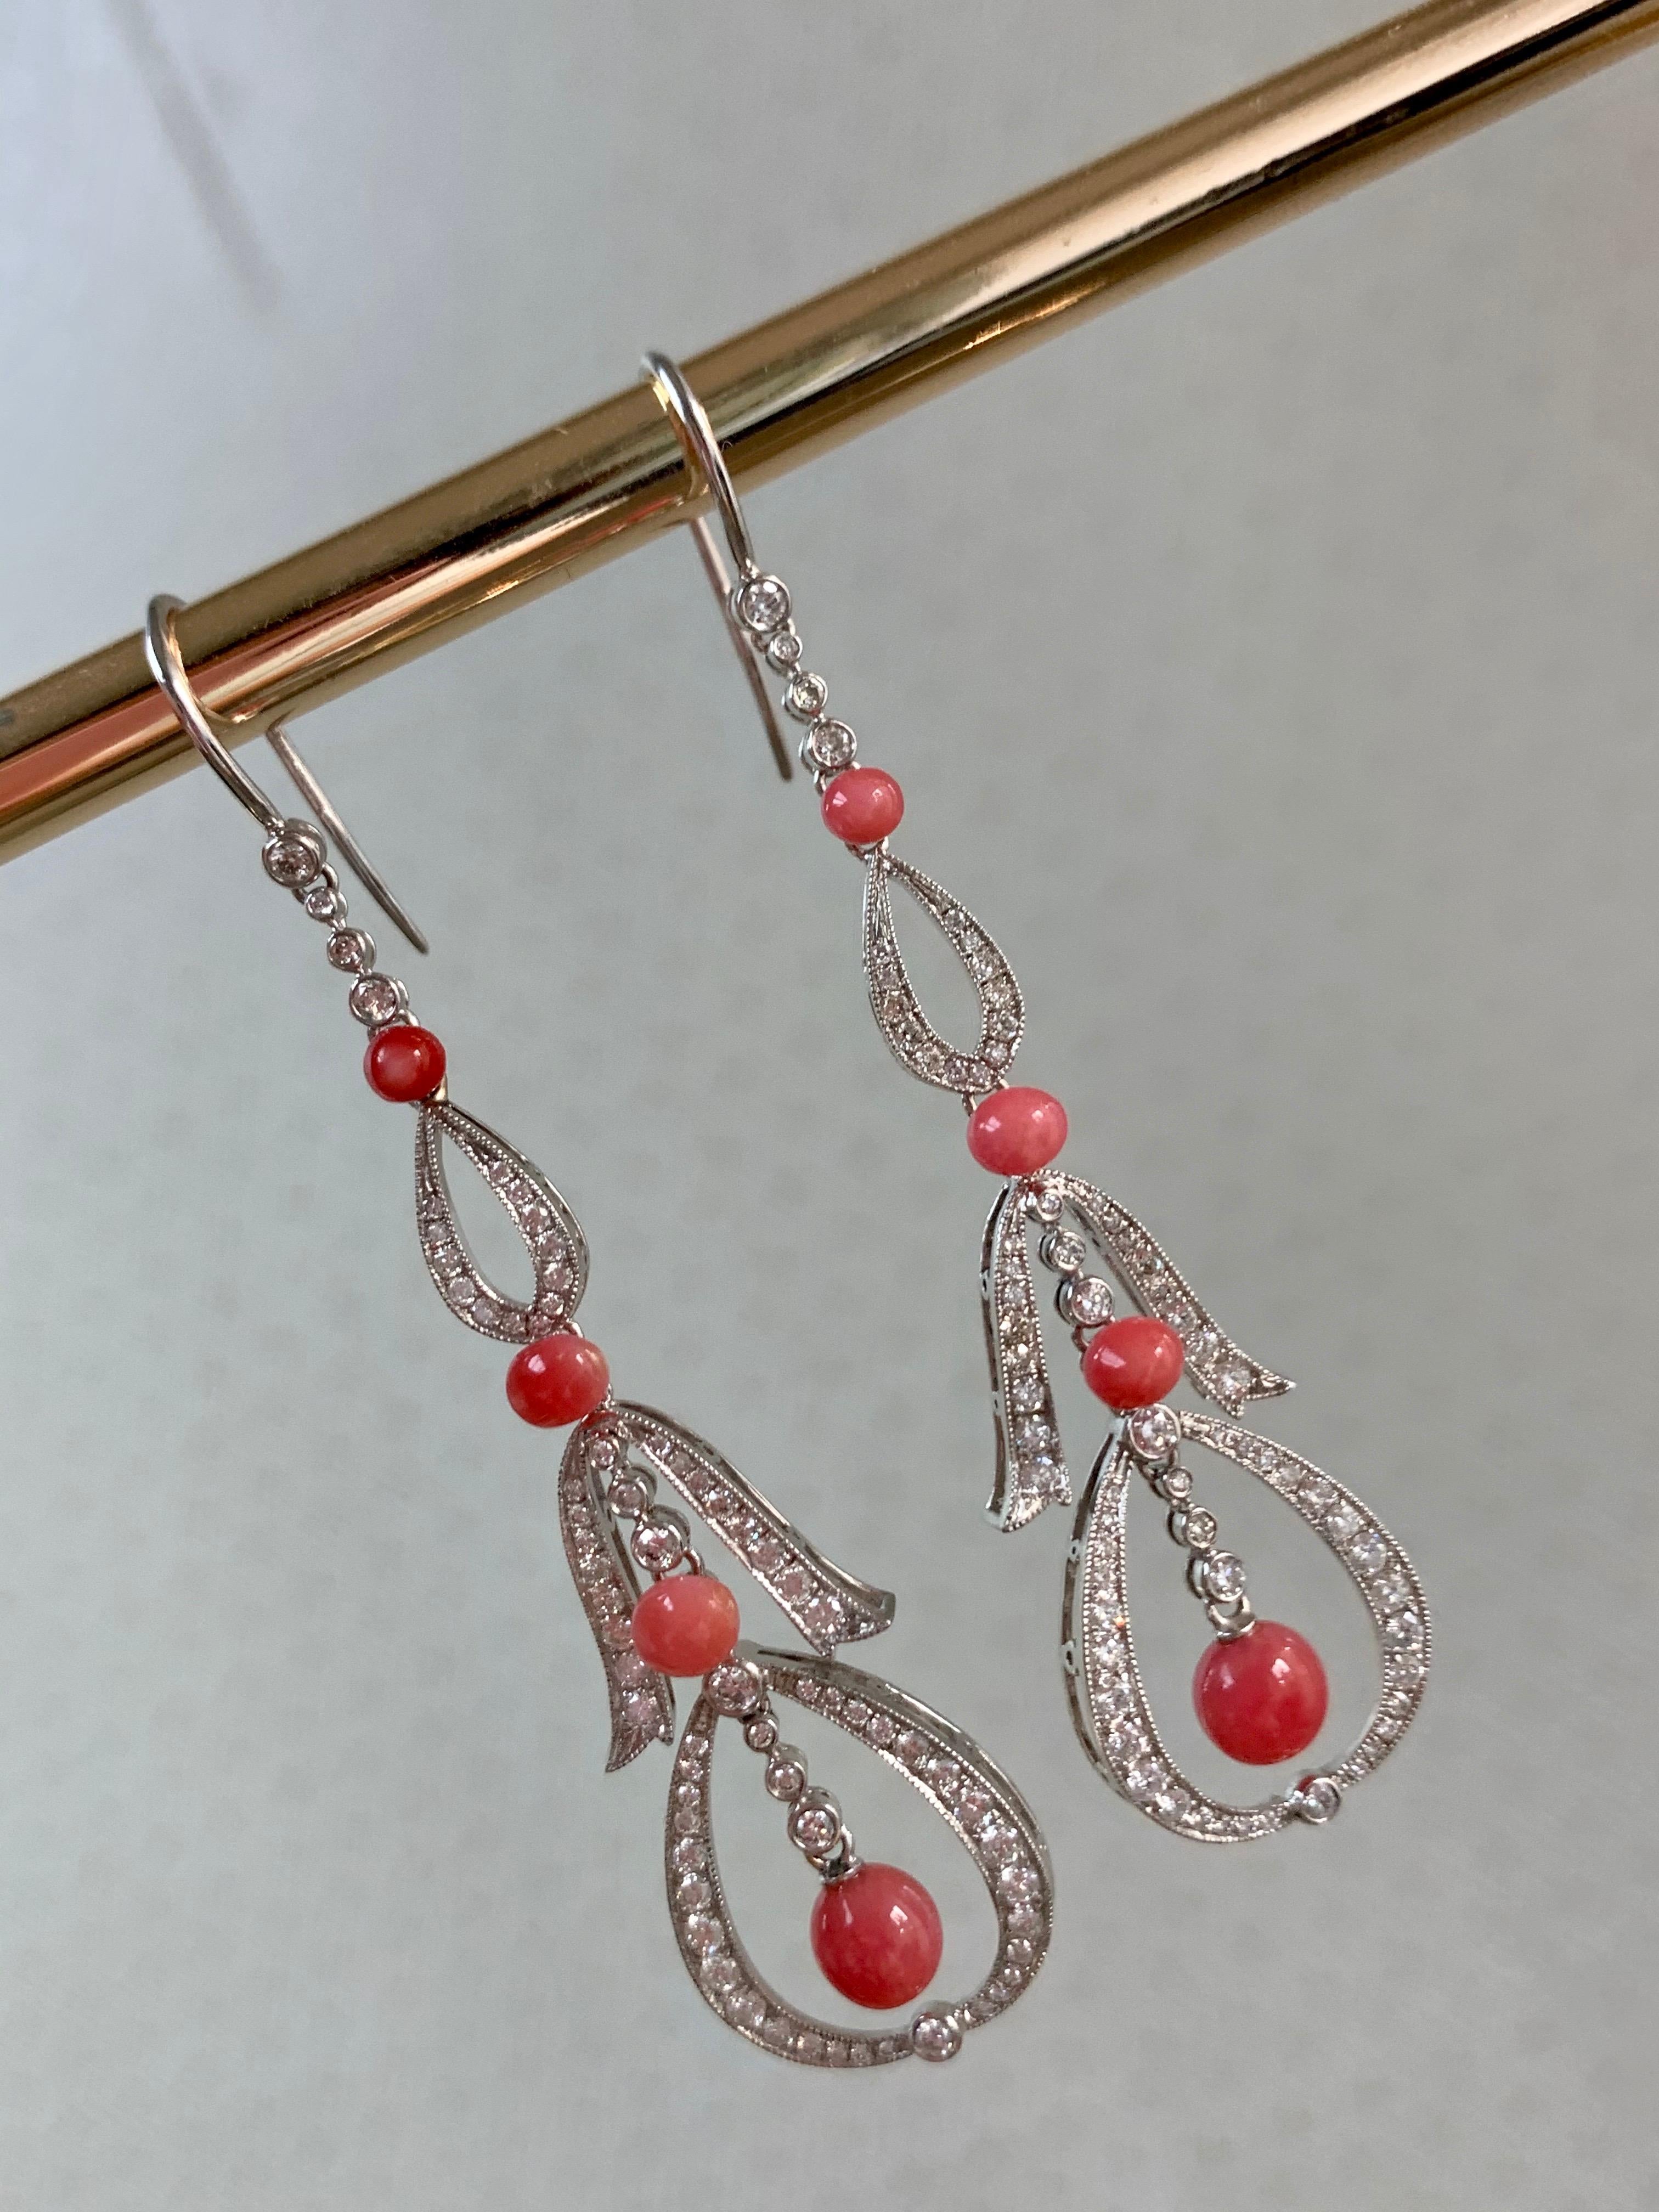 A pair of conch pearl and diamond drop earrings, the articulated links millegrain-set with circular-cut diamonds and graduated conch pearls in white gold, shepherd's hook fittings, 6.8cm high. Perfect condition. 

